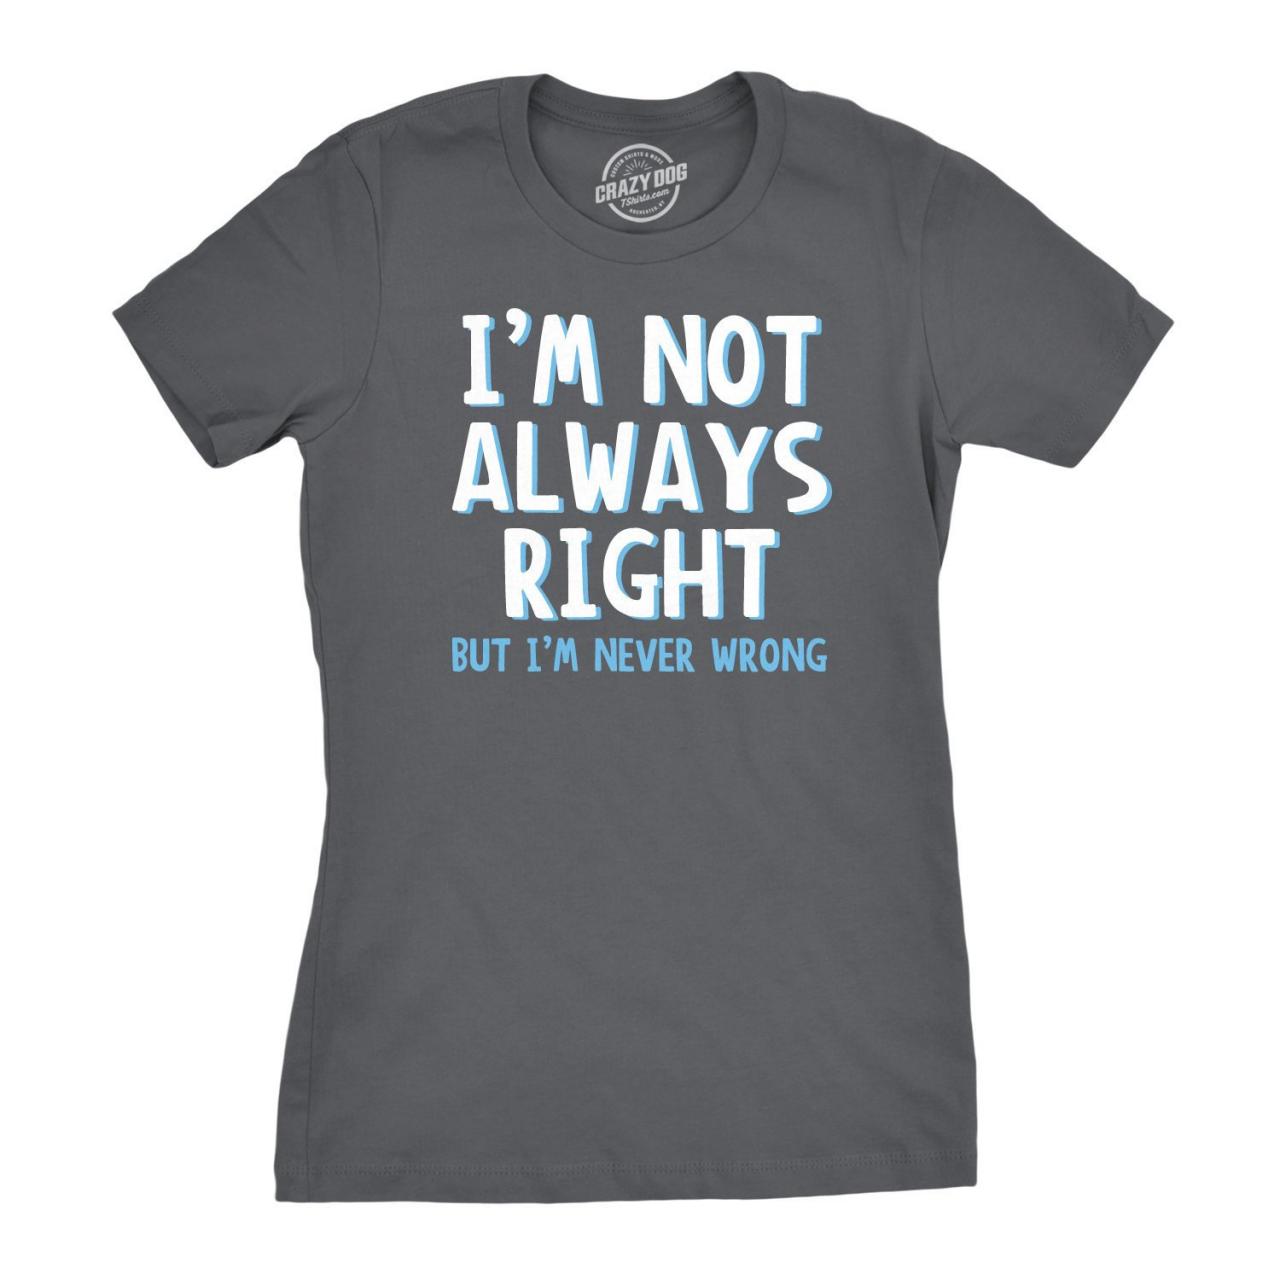 New Wife Shirt, Bossy Wife T Shirt, T Shirt gift for newlyweds, Wifey Gift, Womens Shirt Funny, Im Not Always Right But Im Never Wrong